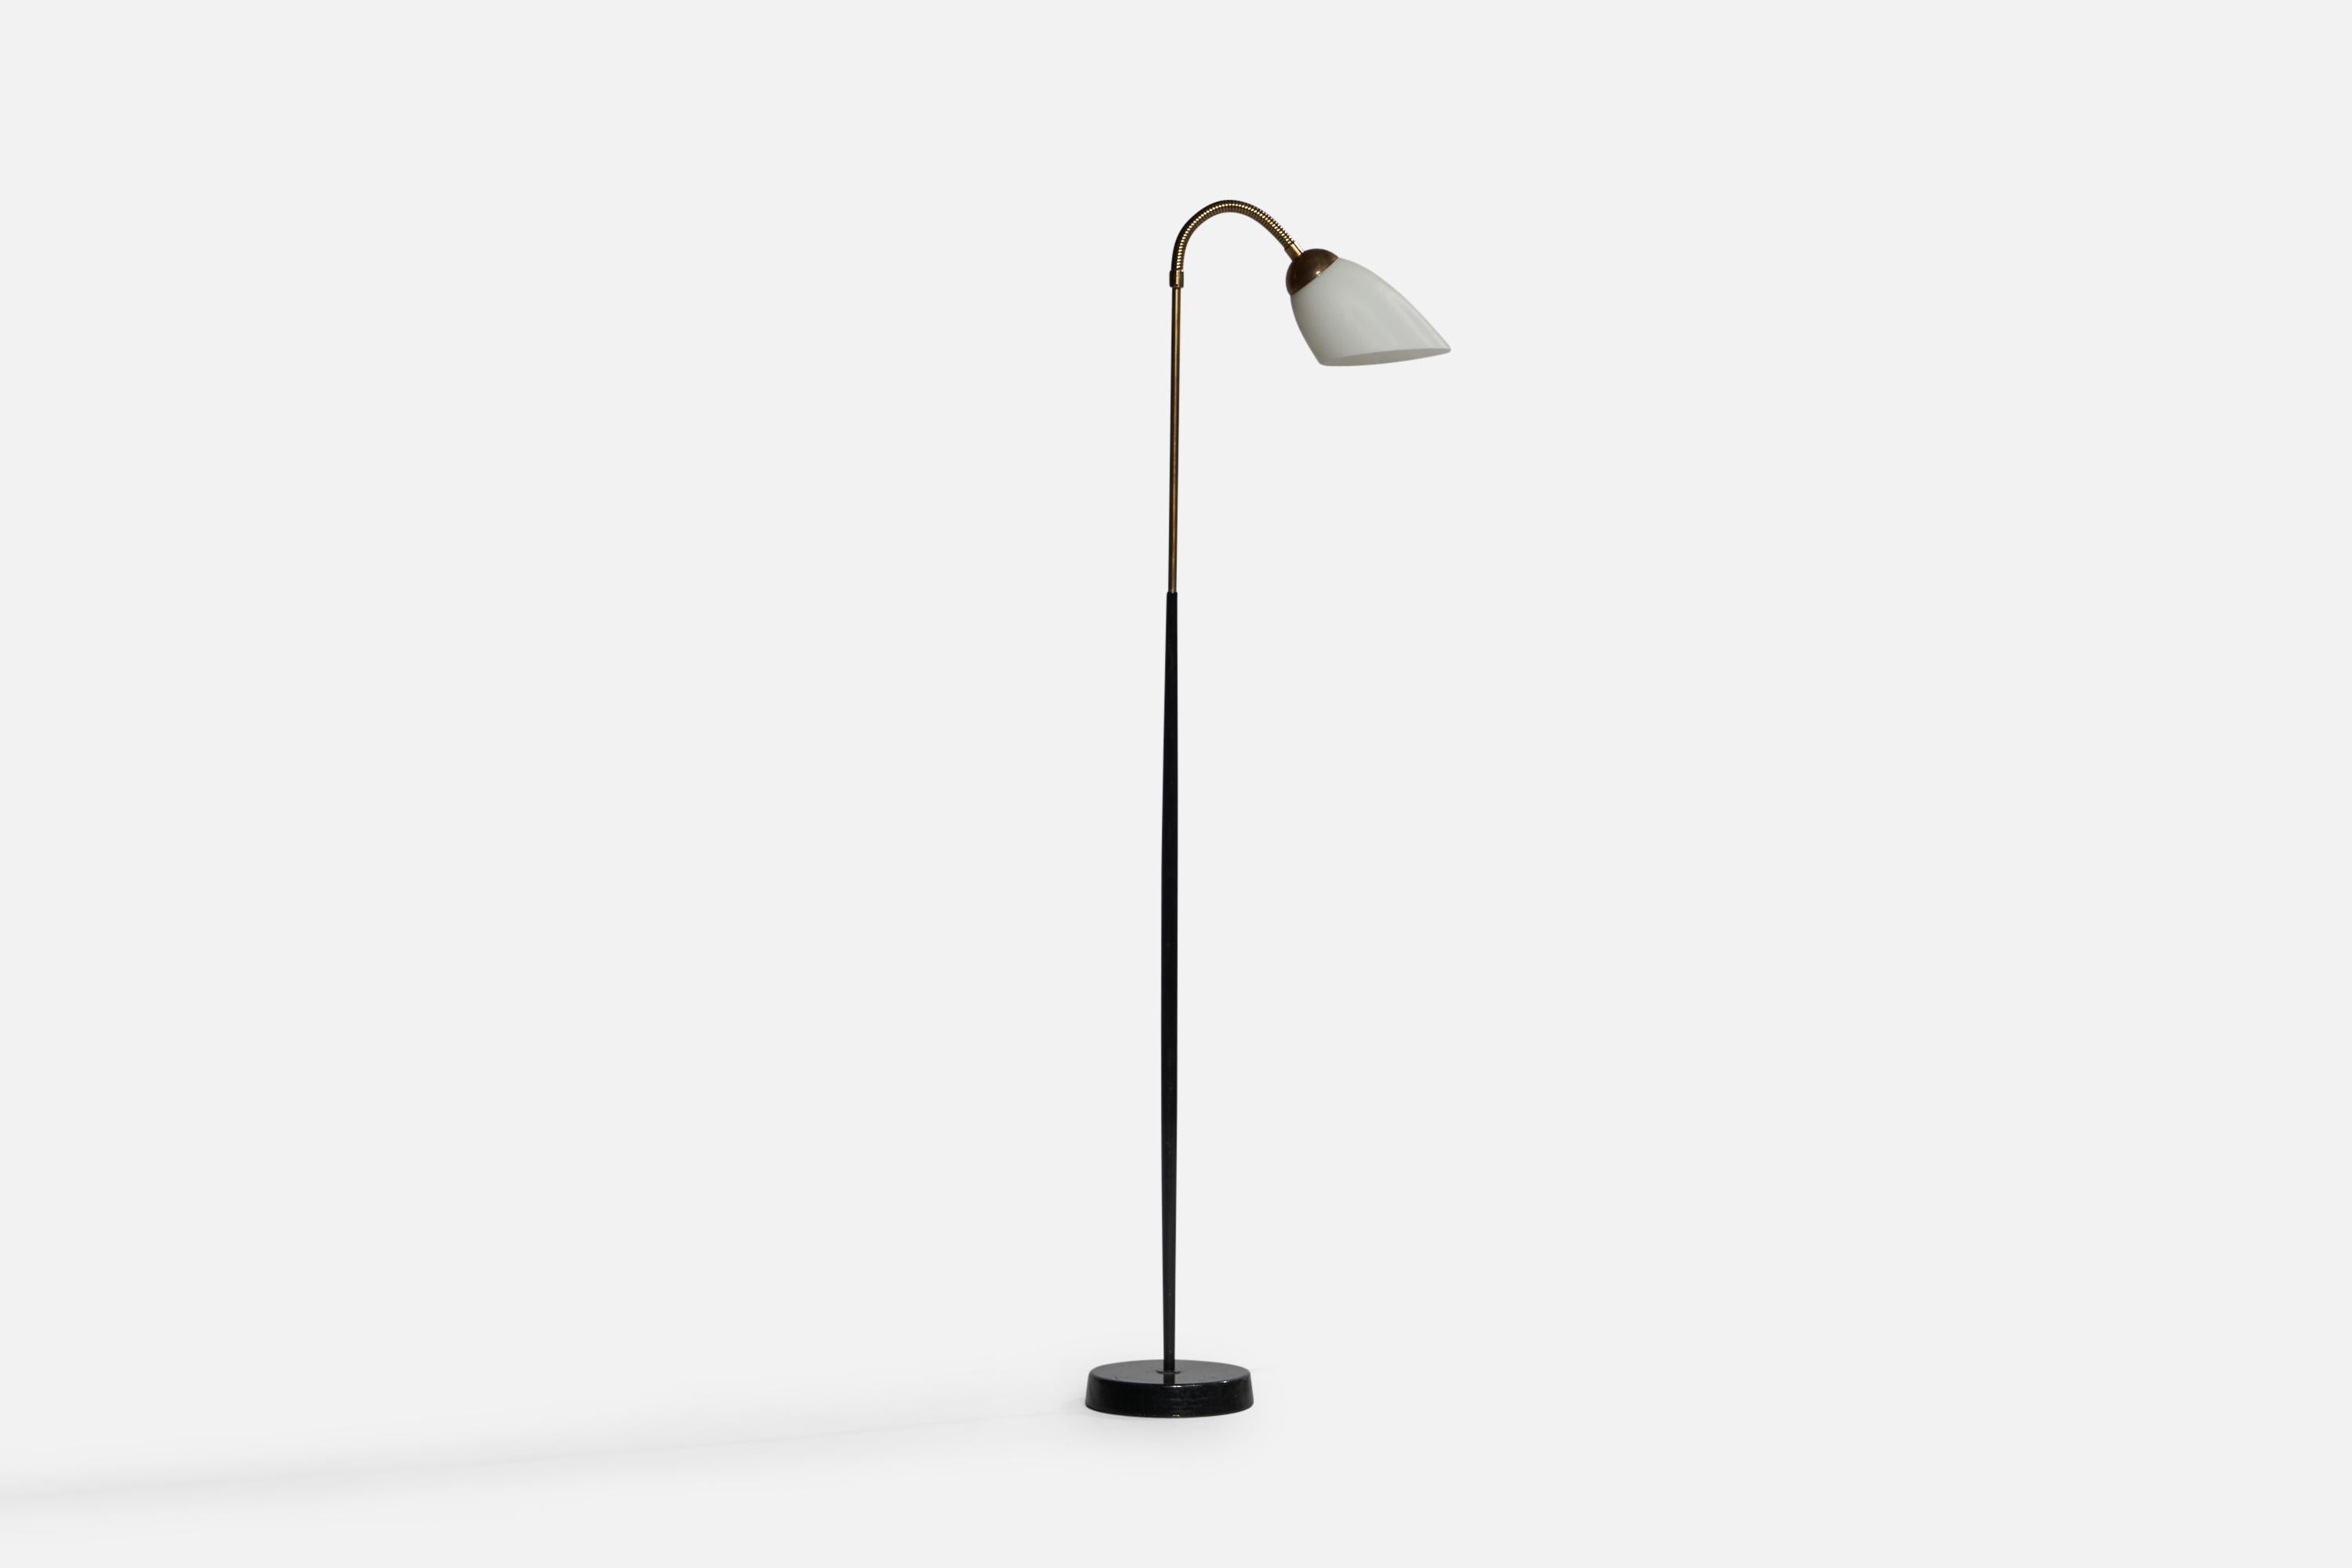 An adjustable brass, black-lacquered metal and opaline glass floor lamp designed and produced in Denmark, 1940s.

Overall Dimensions (inches): 49.9” H x 7” W x 17.4” D. Stated dimensions include glass shade.
Dimensions vary based on position of